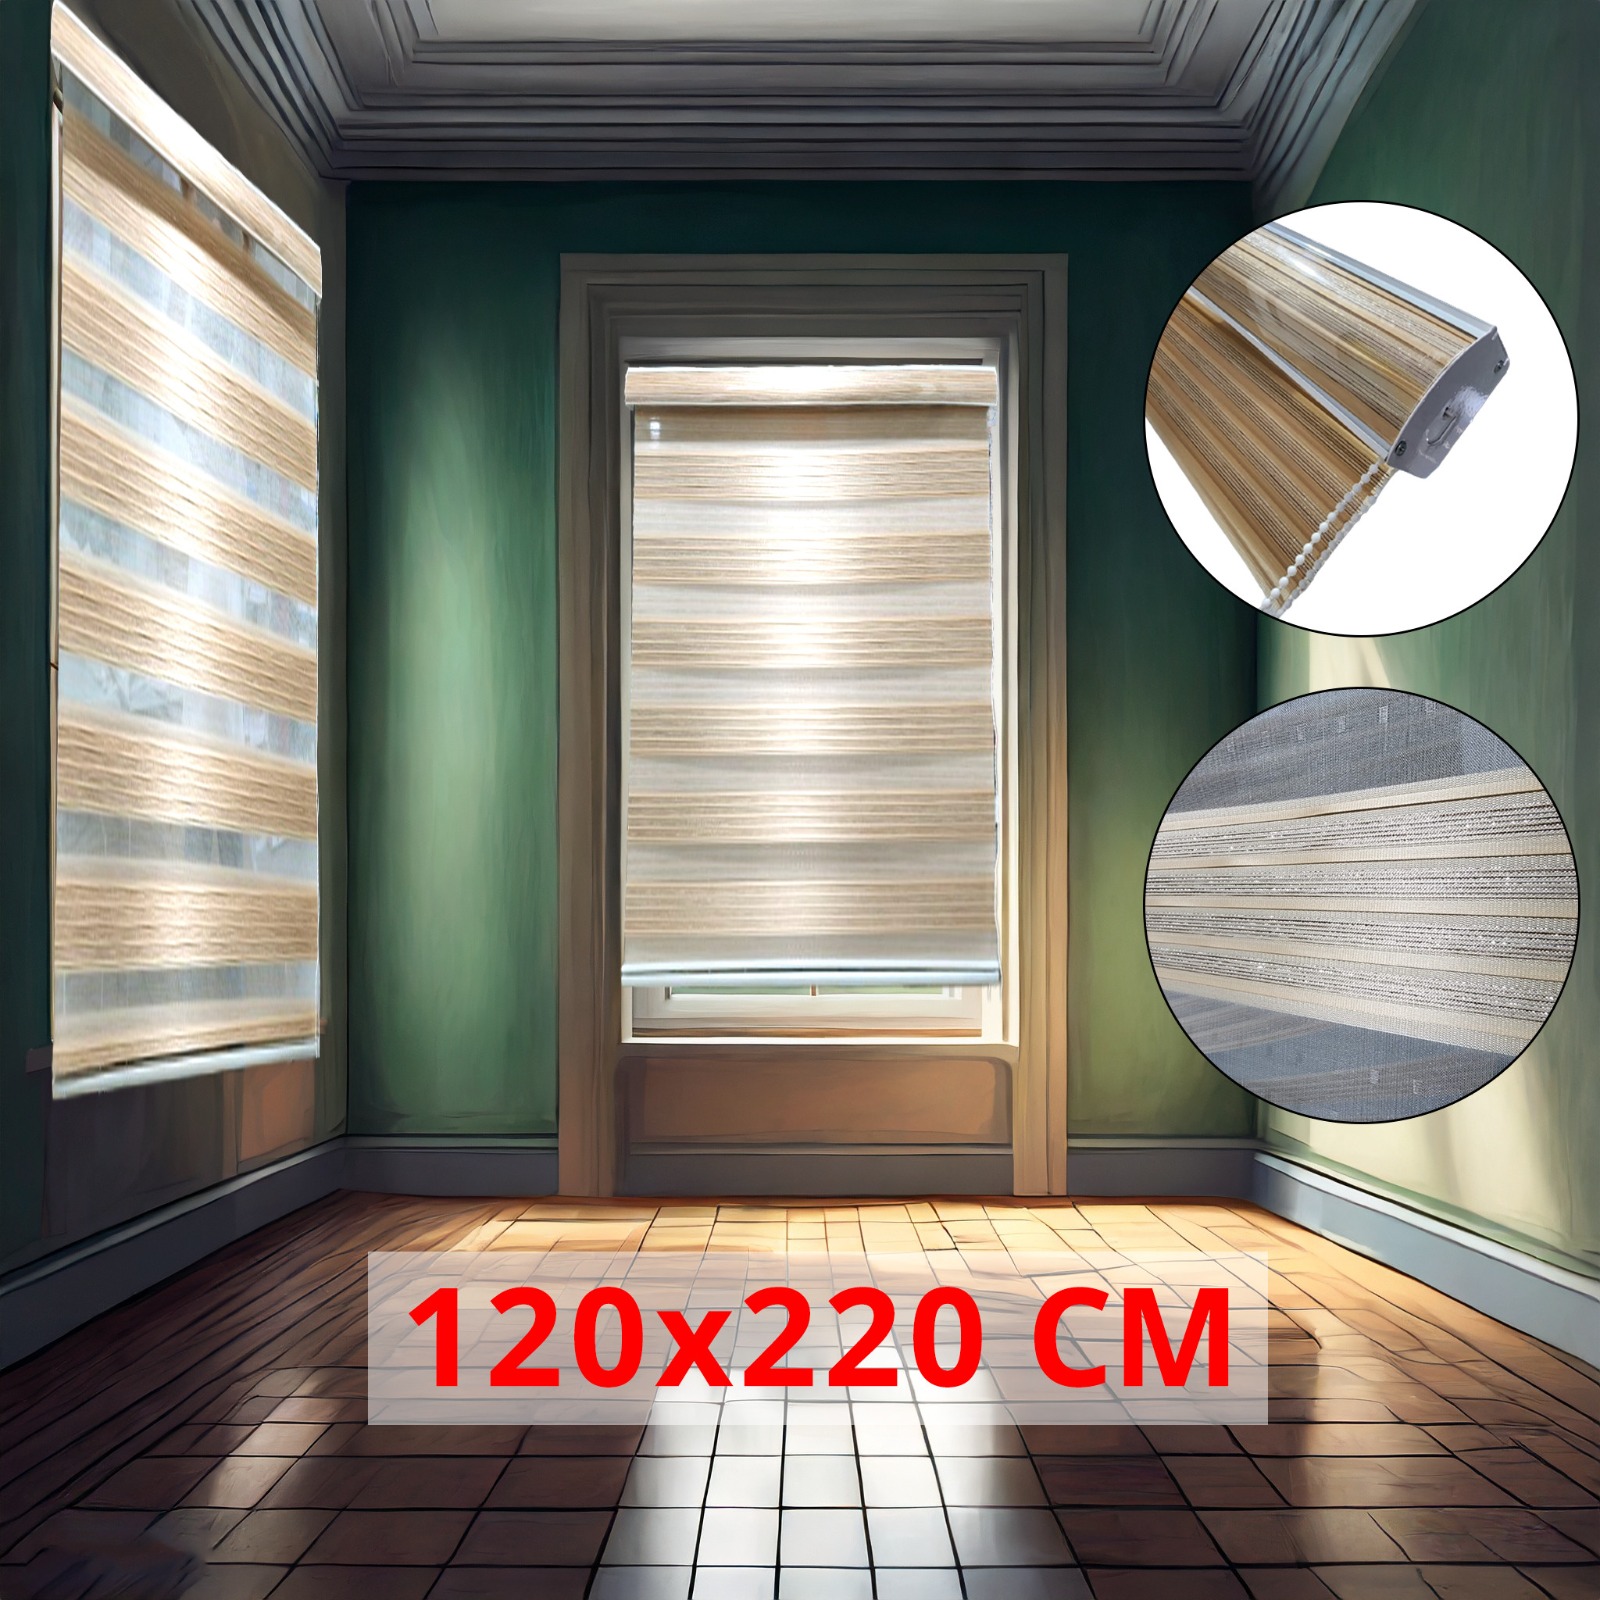 %28120%2A220cm+Glossy+Beige+%29+Modern+3D+Style+Window+and+Door+Roller+Blind